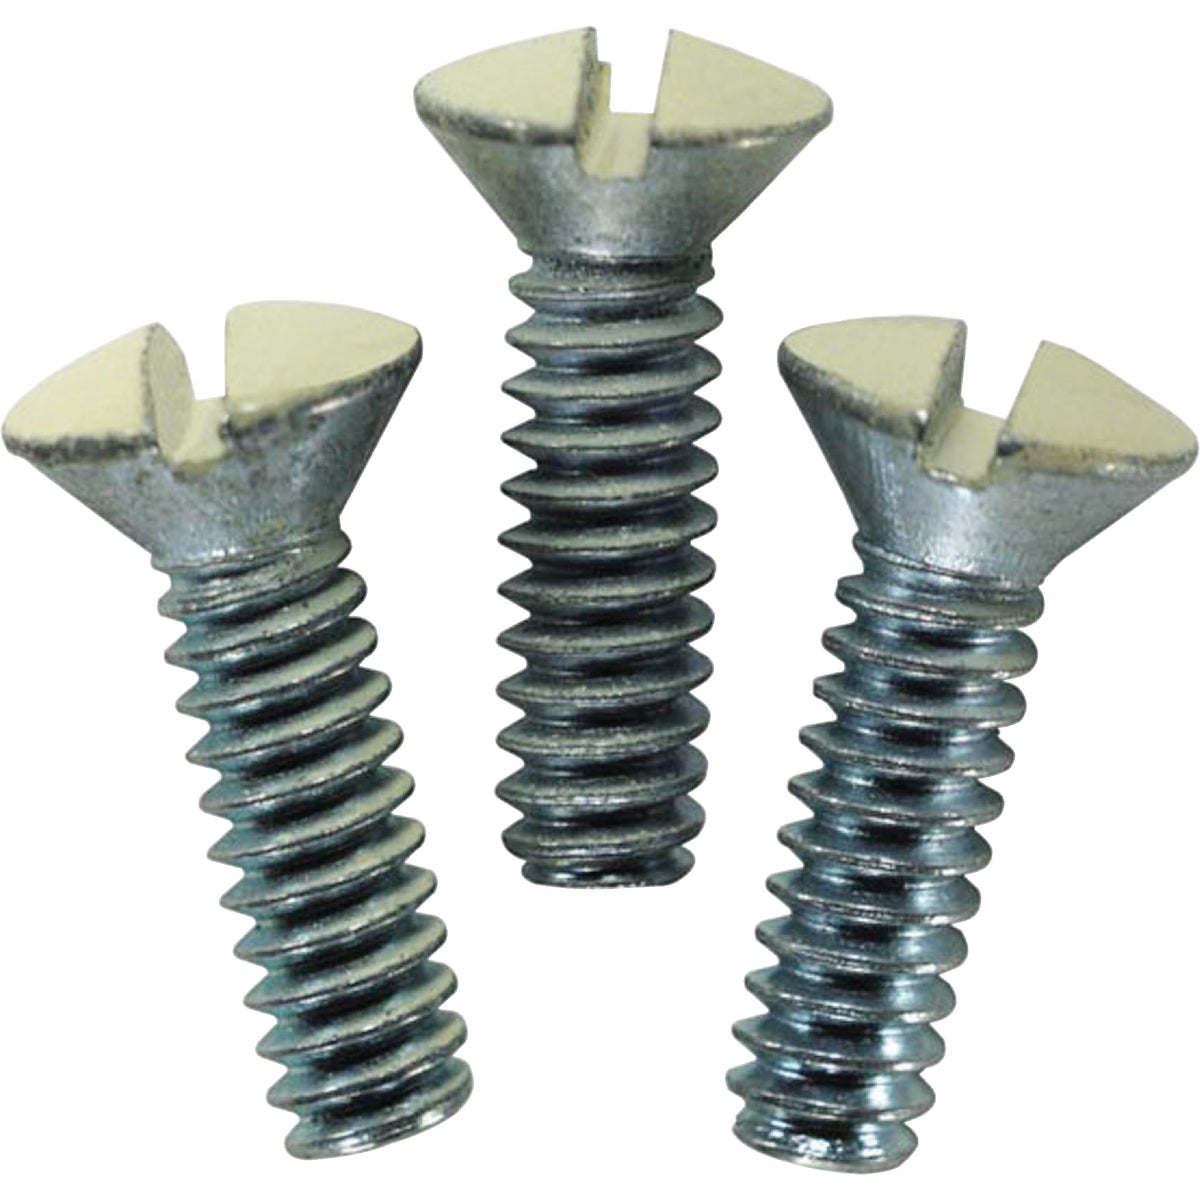 Item 501378, Replacement screws that are compatible with most Leviton wall plates.